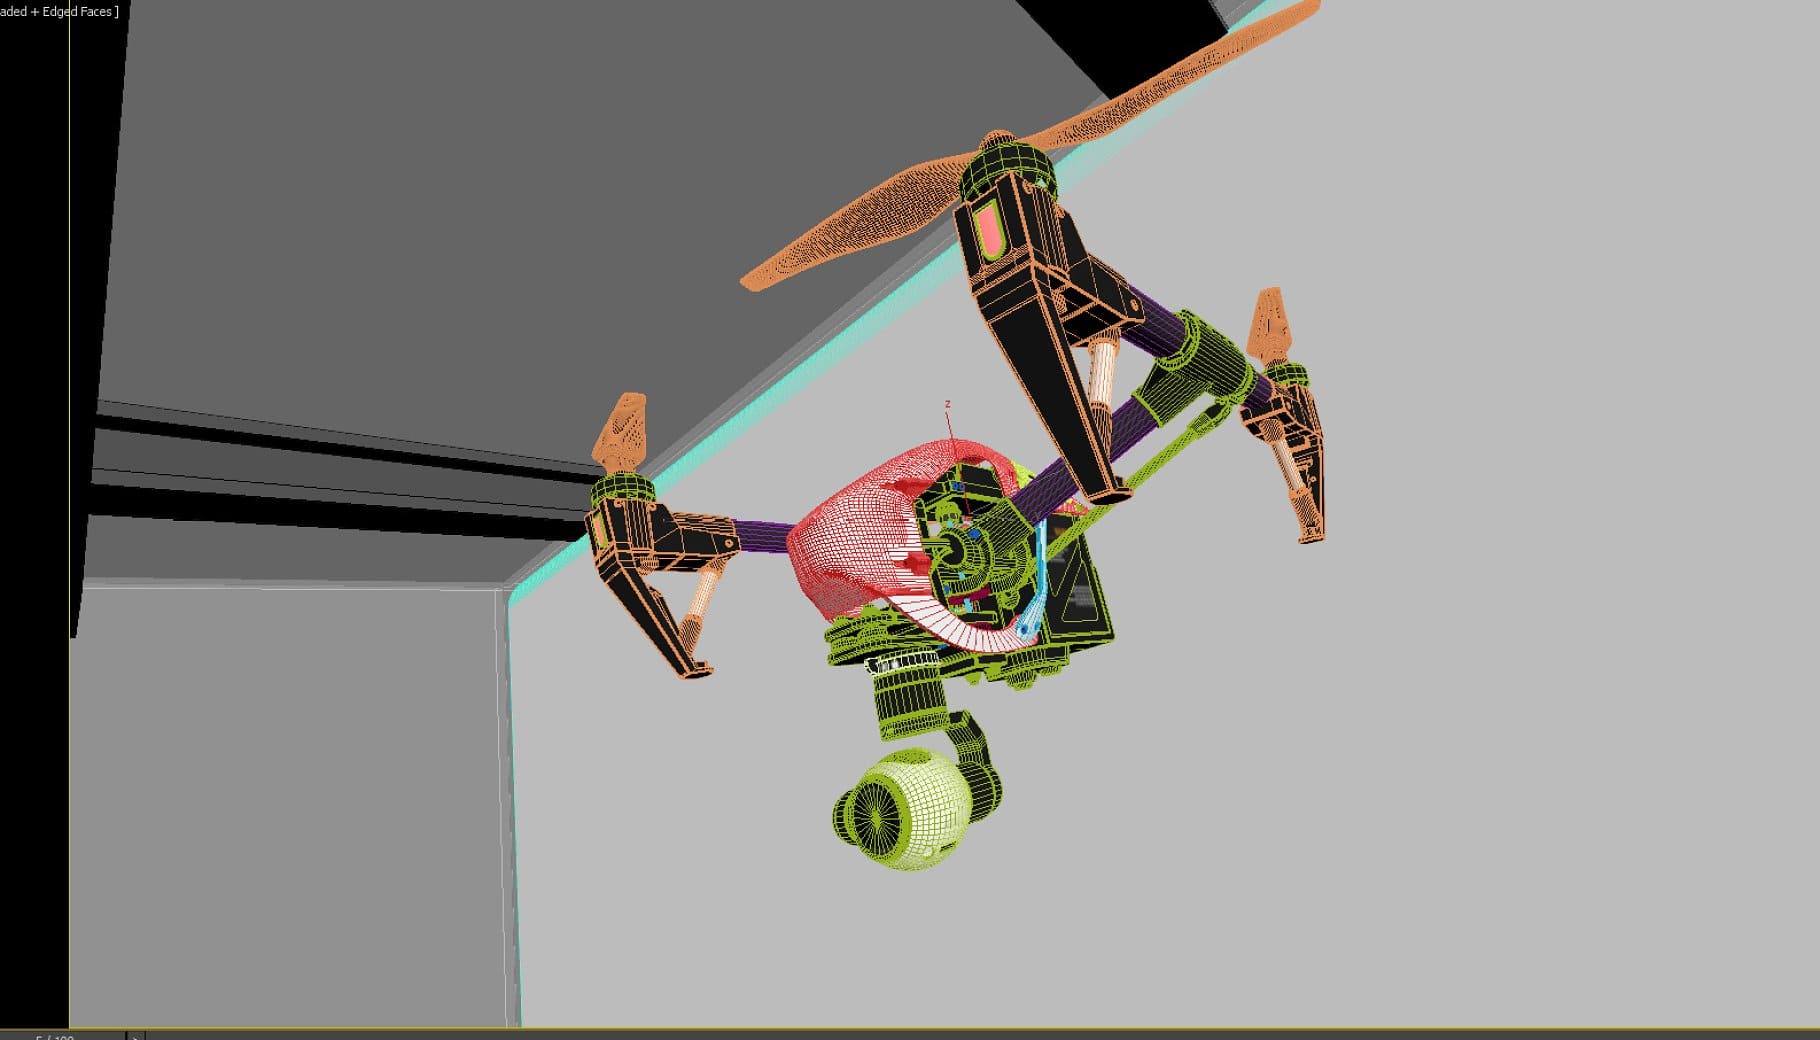 3D model of a quadcopter with a large camera attached to the bottom of the quadcopter.